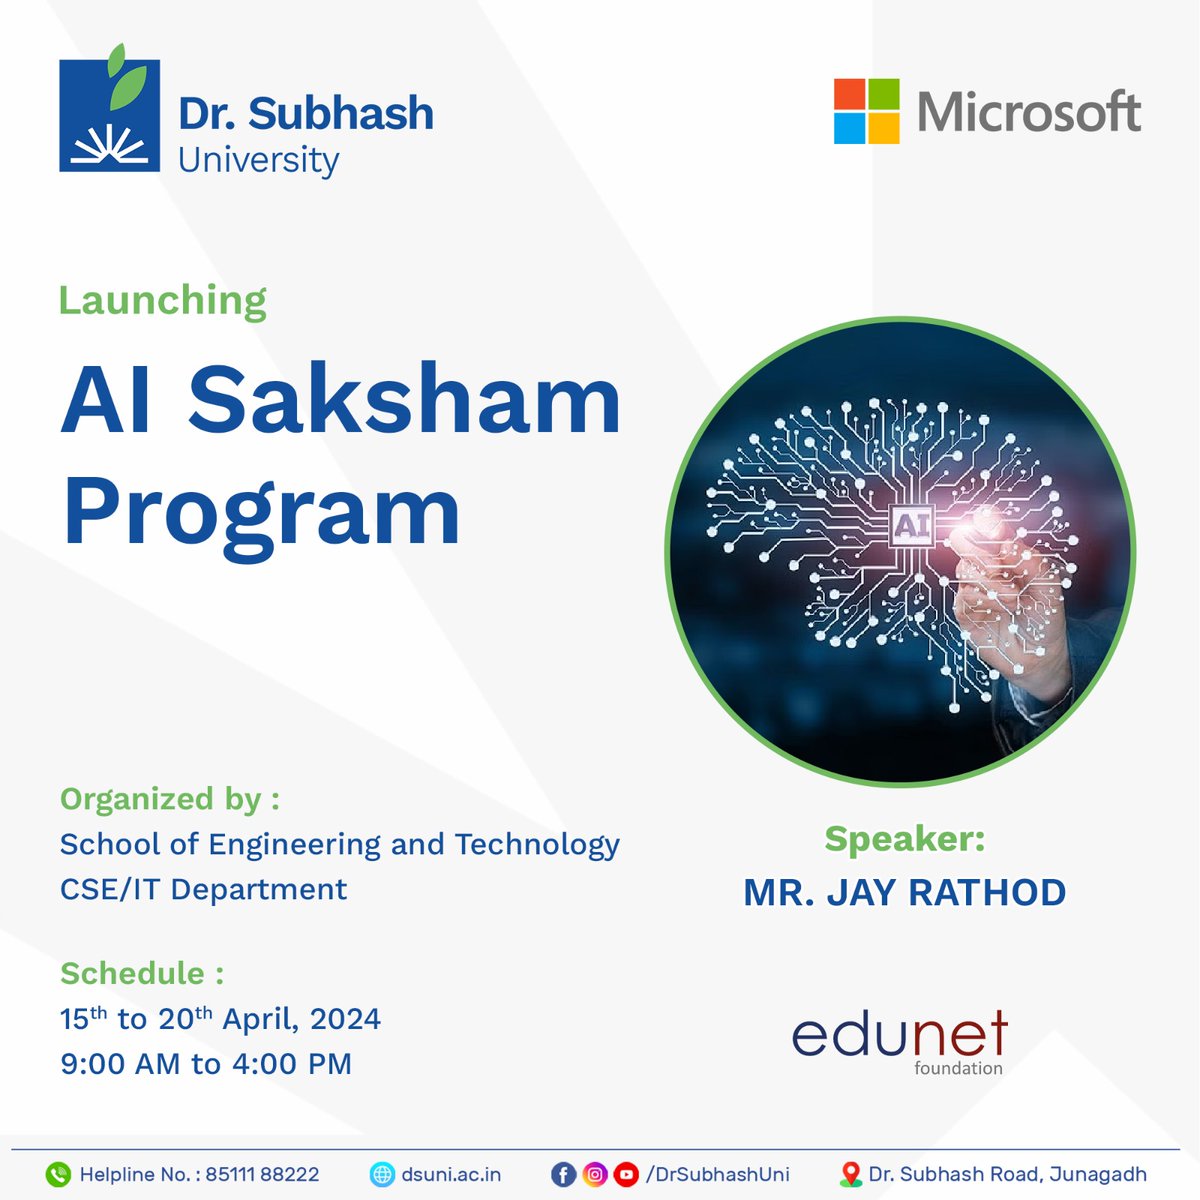 Launching a new era in education! Join us at DSU as we partner with Edunet Foundation to introduce the AI Saksham Program. From April 15-20, 9AM-4PM, immerse yourself in the power of artificial intelligence. #AISaksham #EmpoweringTomorrow #Microsoft #DSU #DrSubhashUniversity